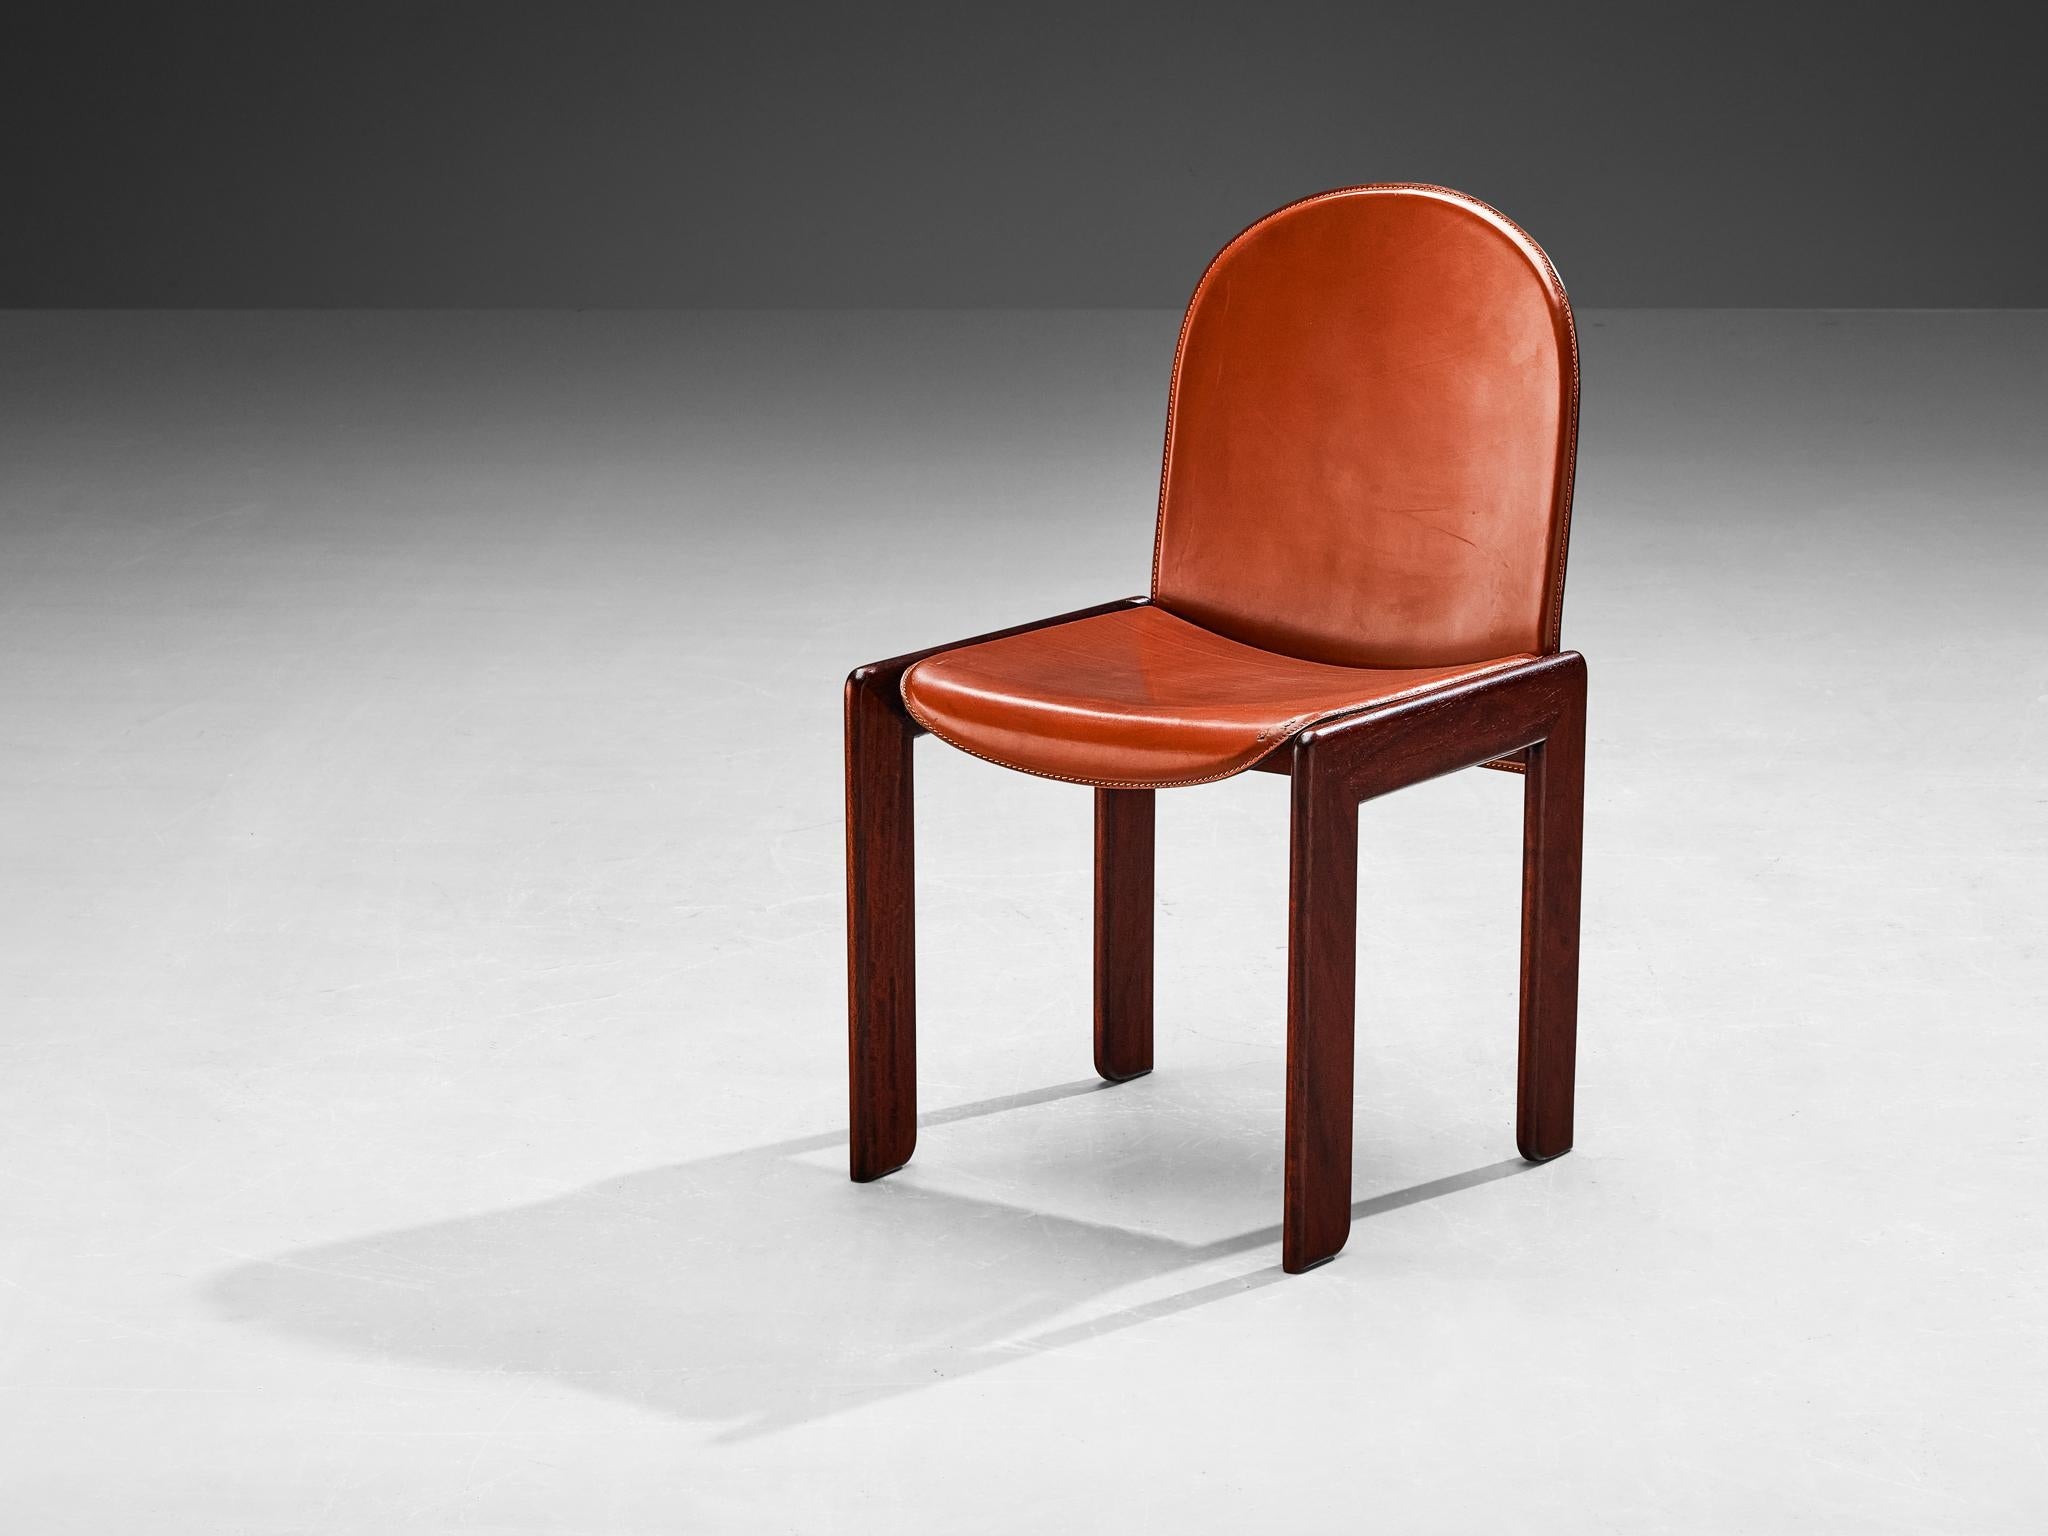 Italian Chair in Red Saddle Leather